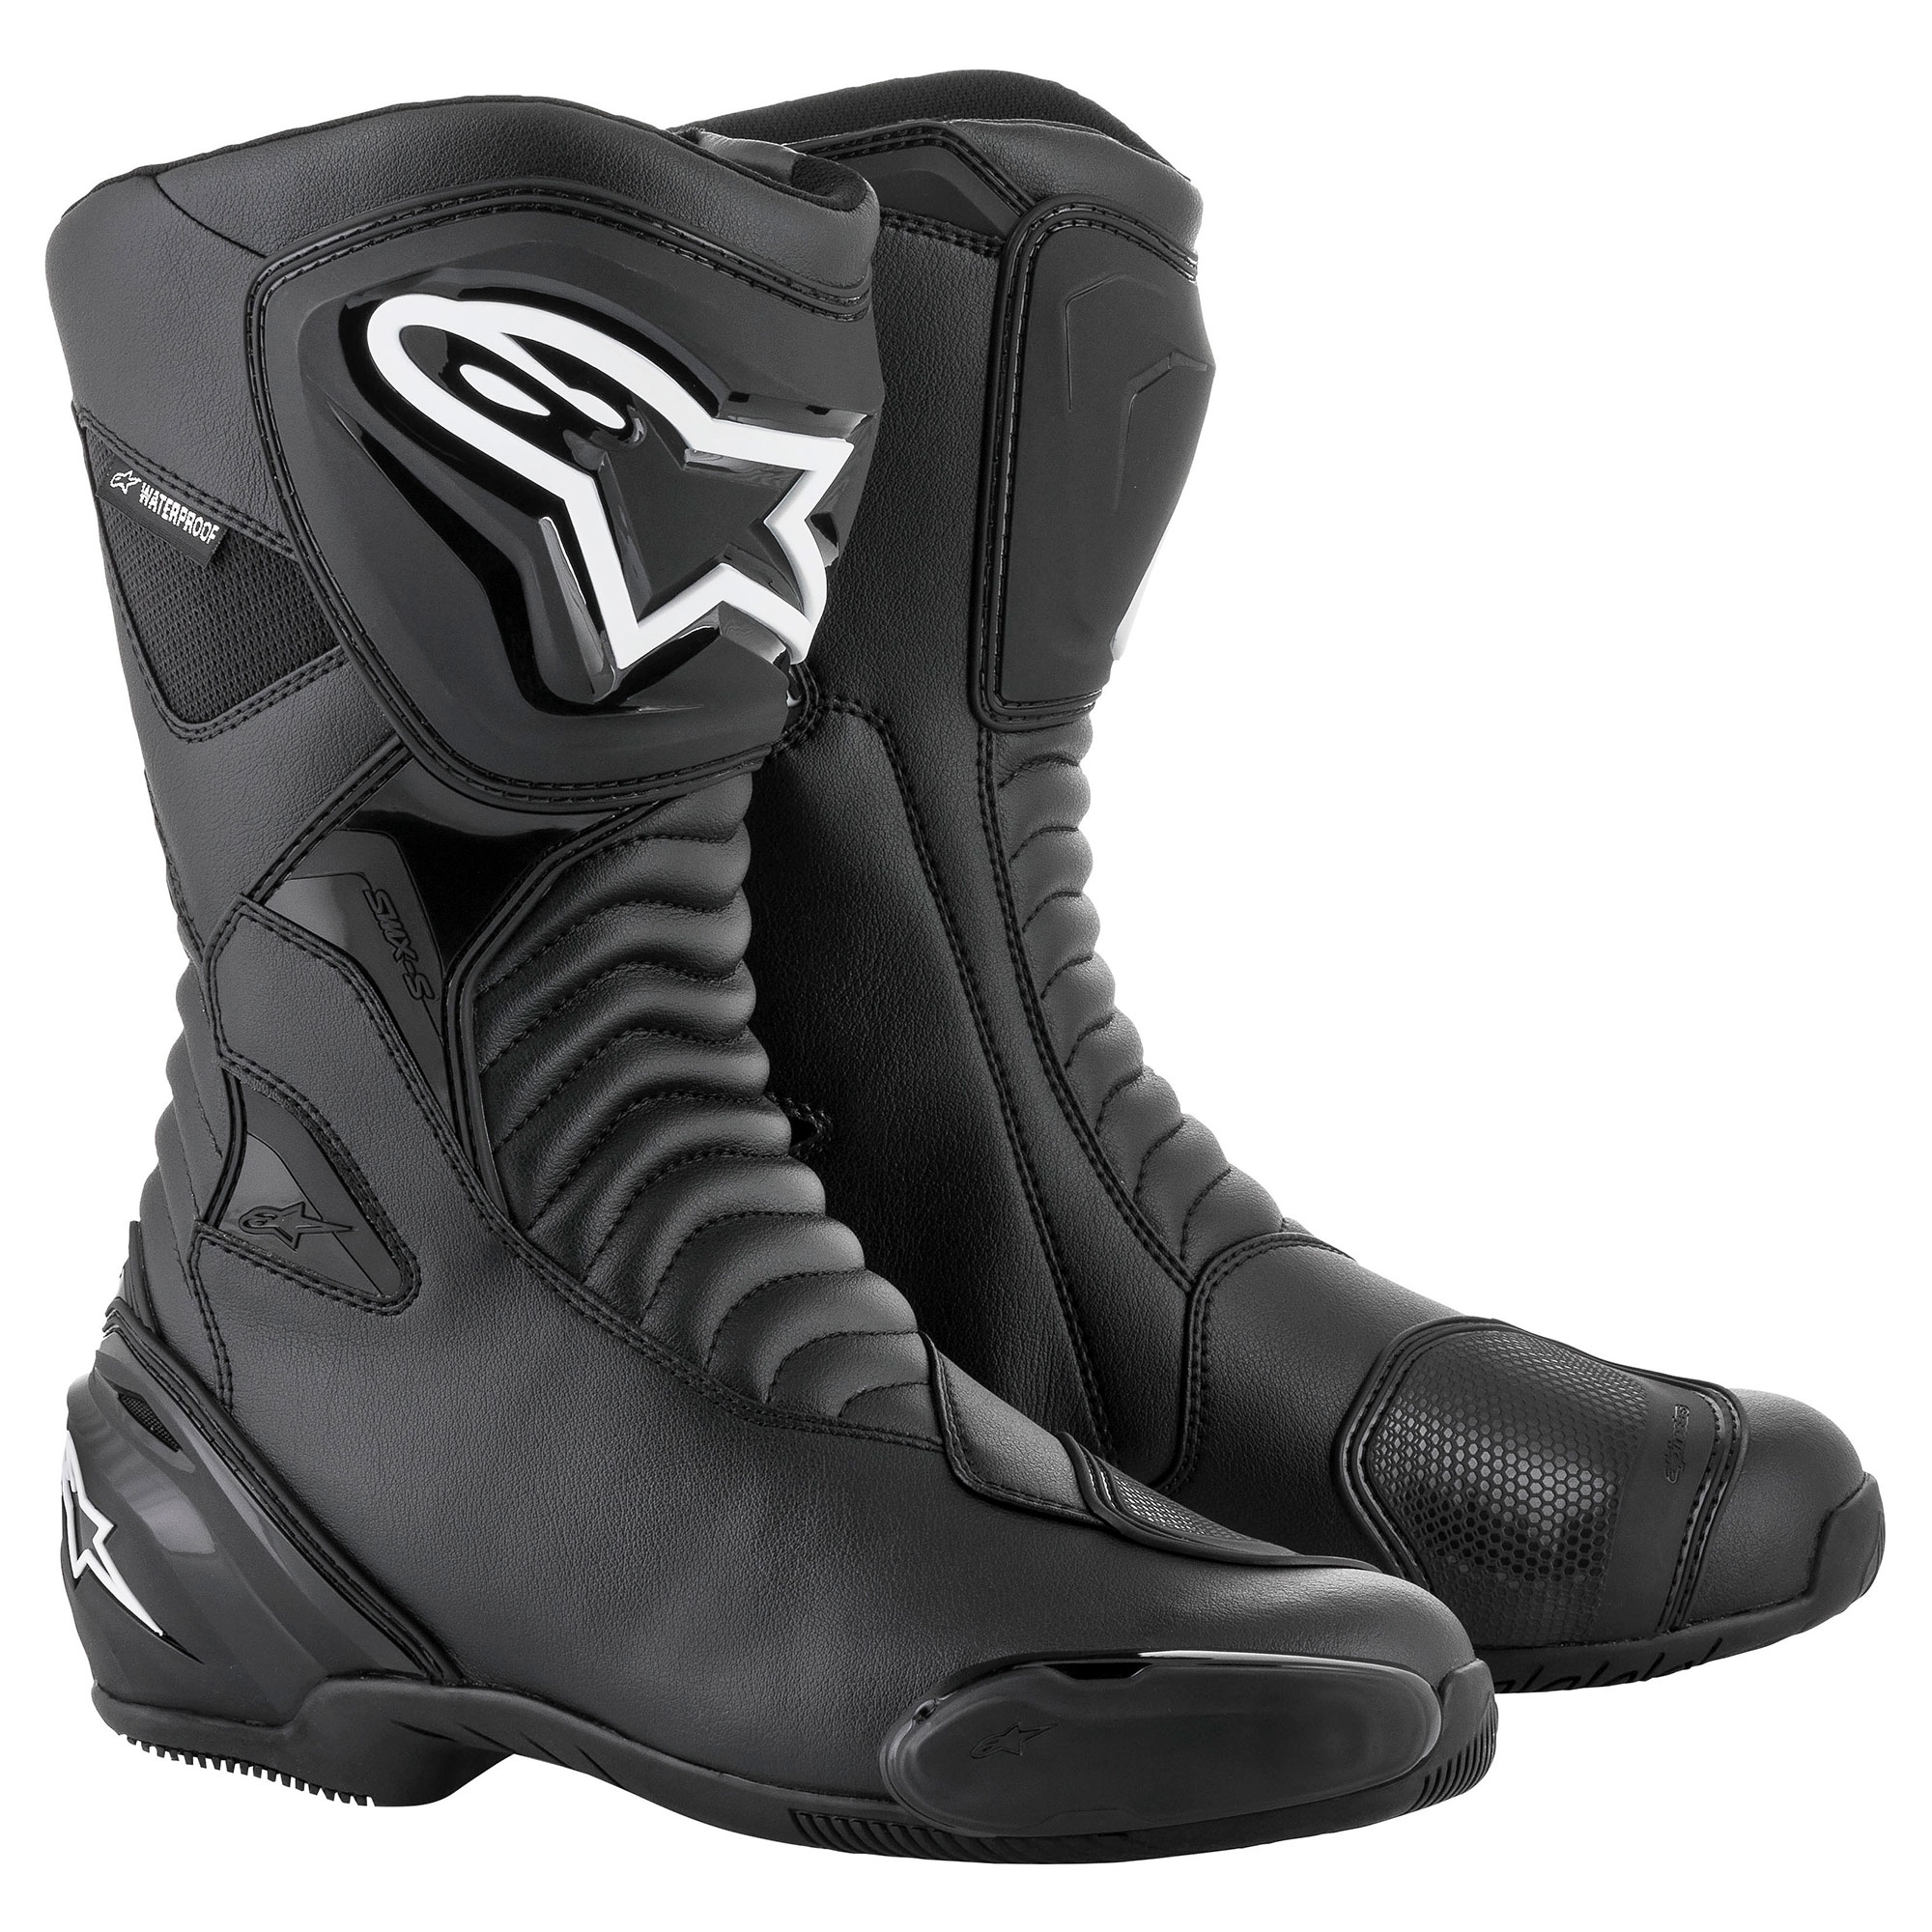 waterproof motorcycle riding boots